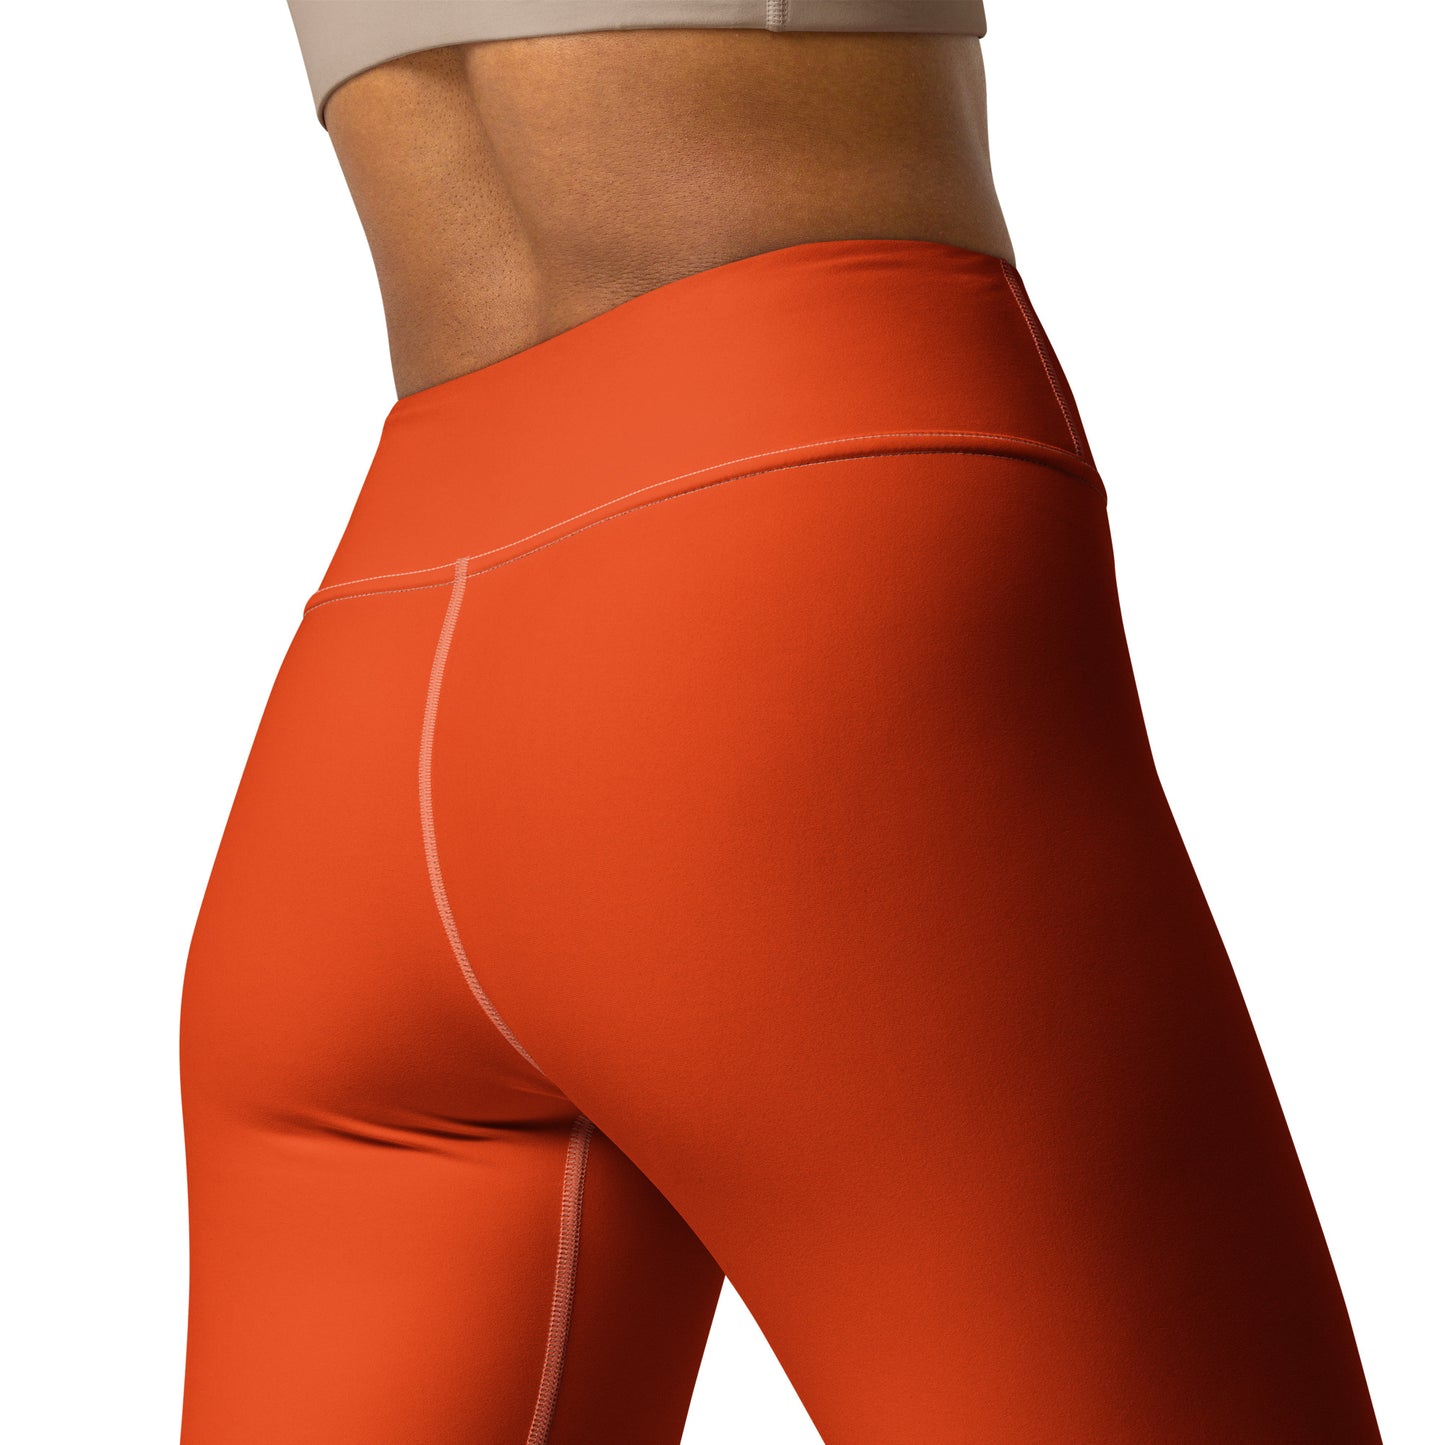 ELEVATED ESSENTIALS, THE PERFECT HIGH WAISTBAND LEGGING OREGON